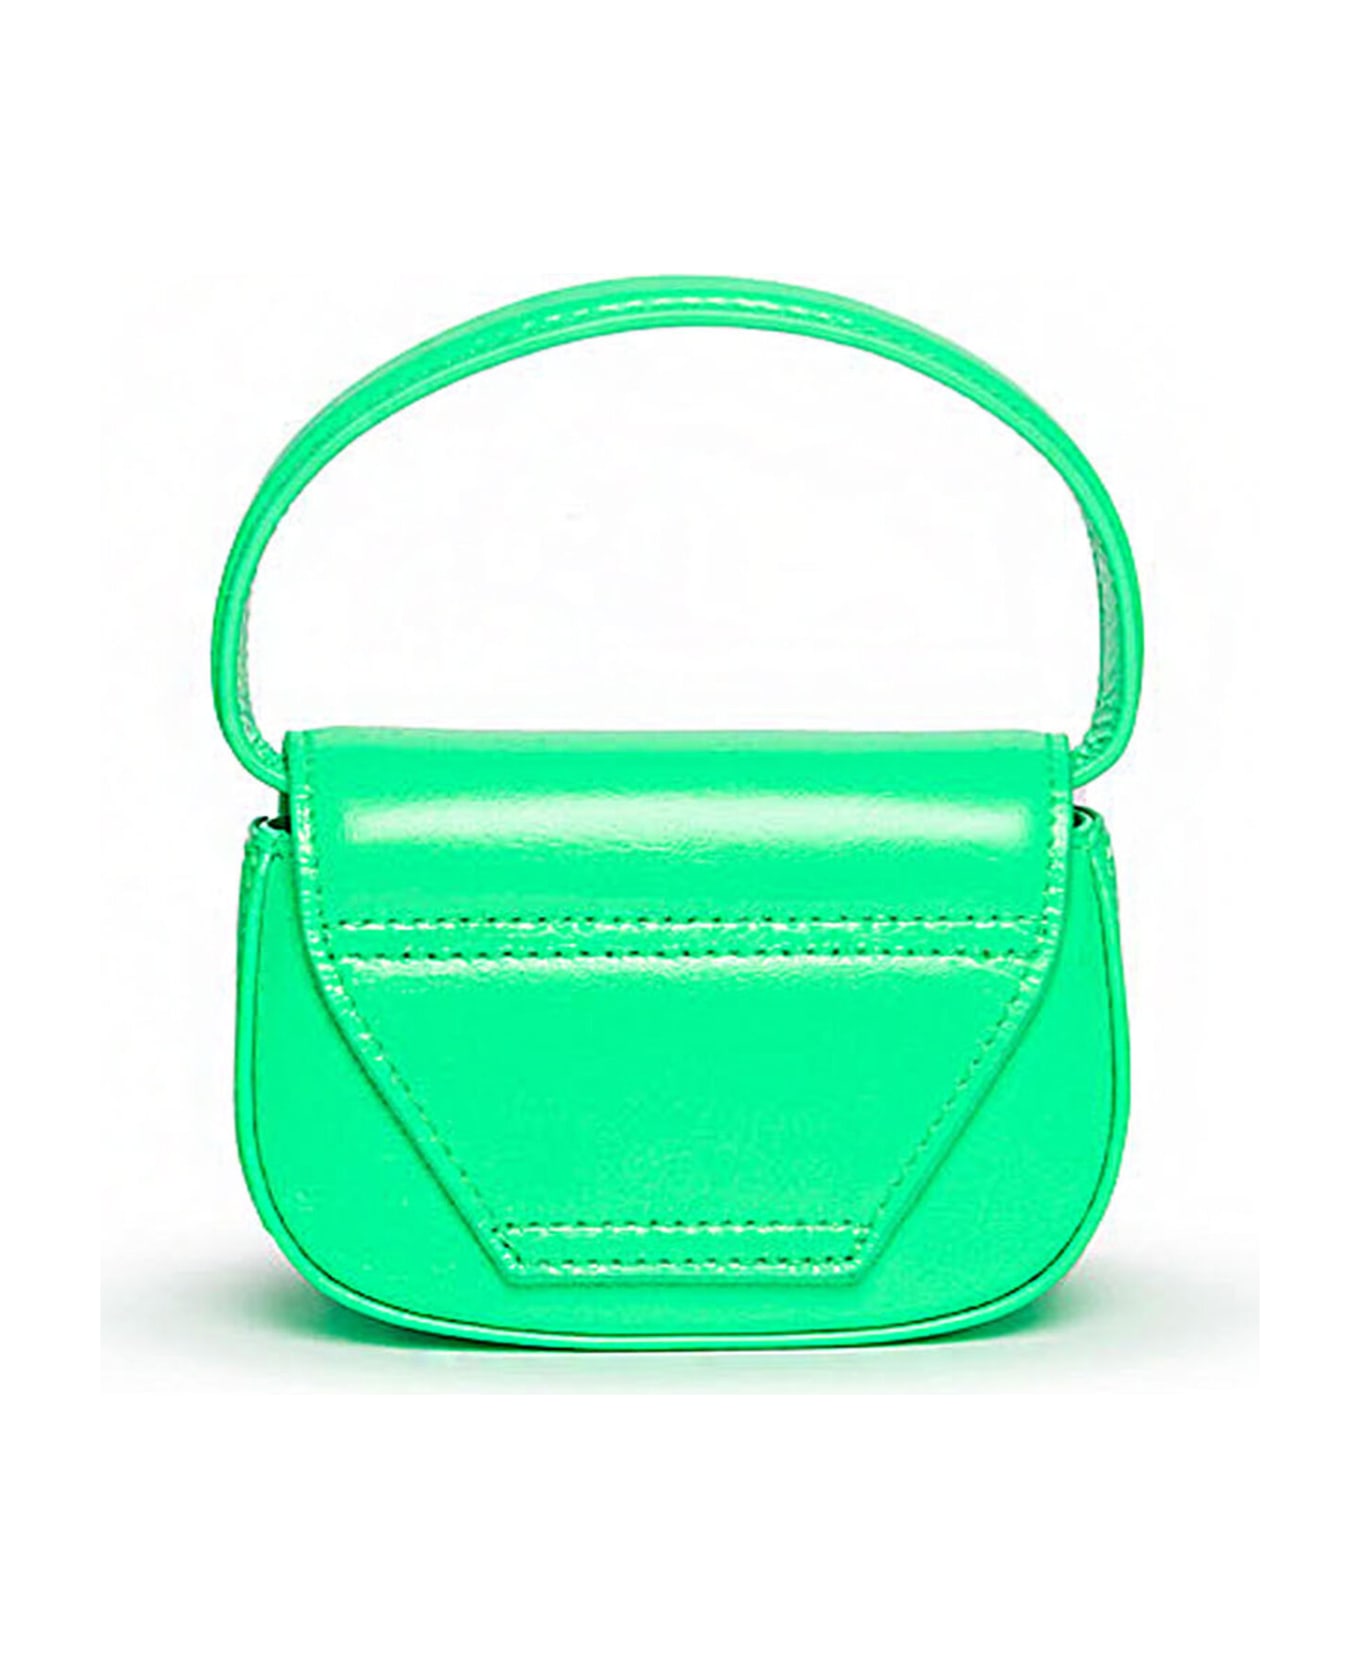 Diesel 1dr Xs Bags Diesel 1dr Xs Bag In Fluo Imitation Leather - Green